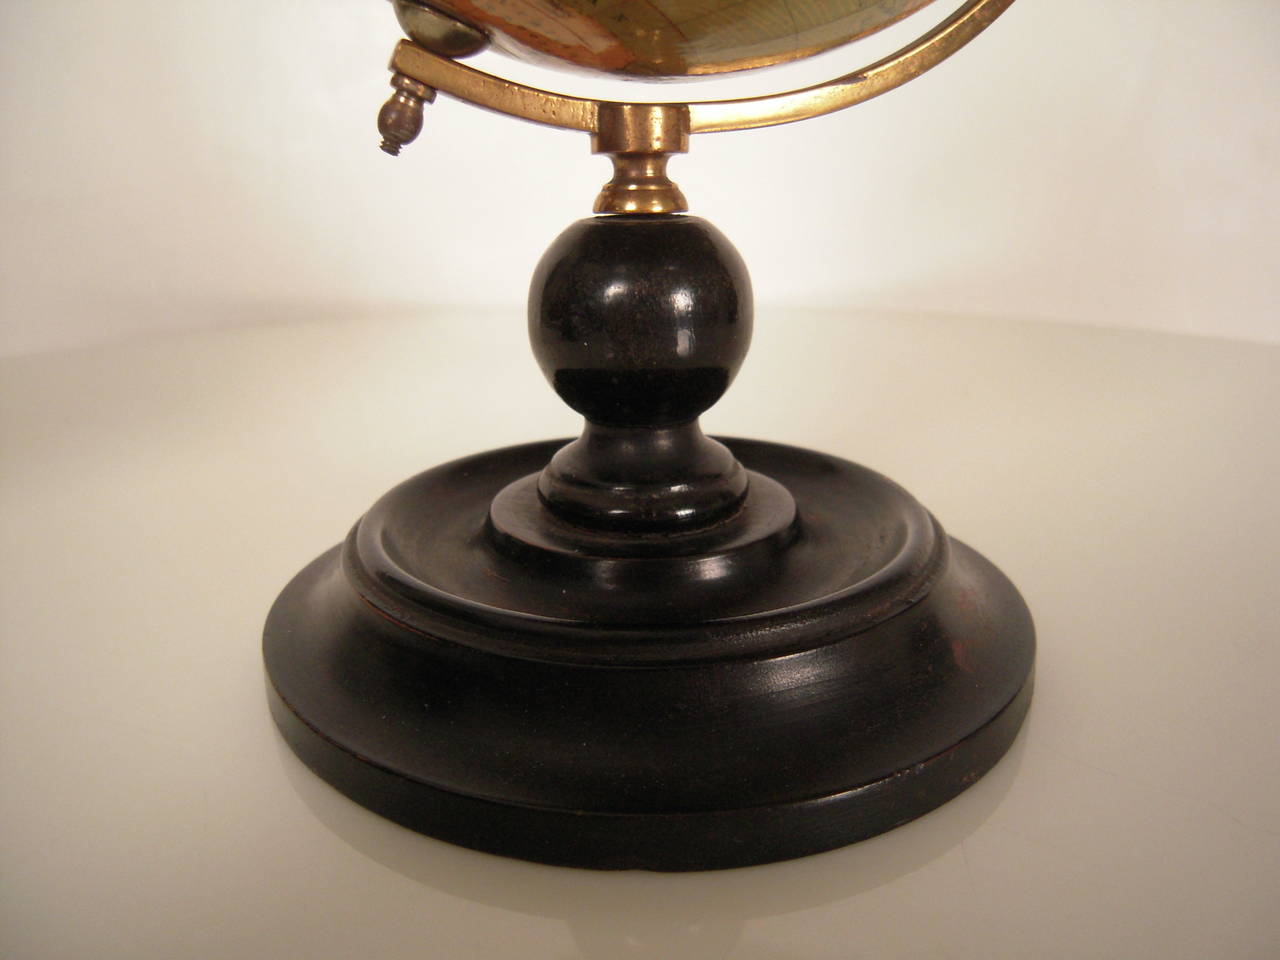 Ebonized Unusual Pair of Small Celestial and Terrestrial Globes